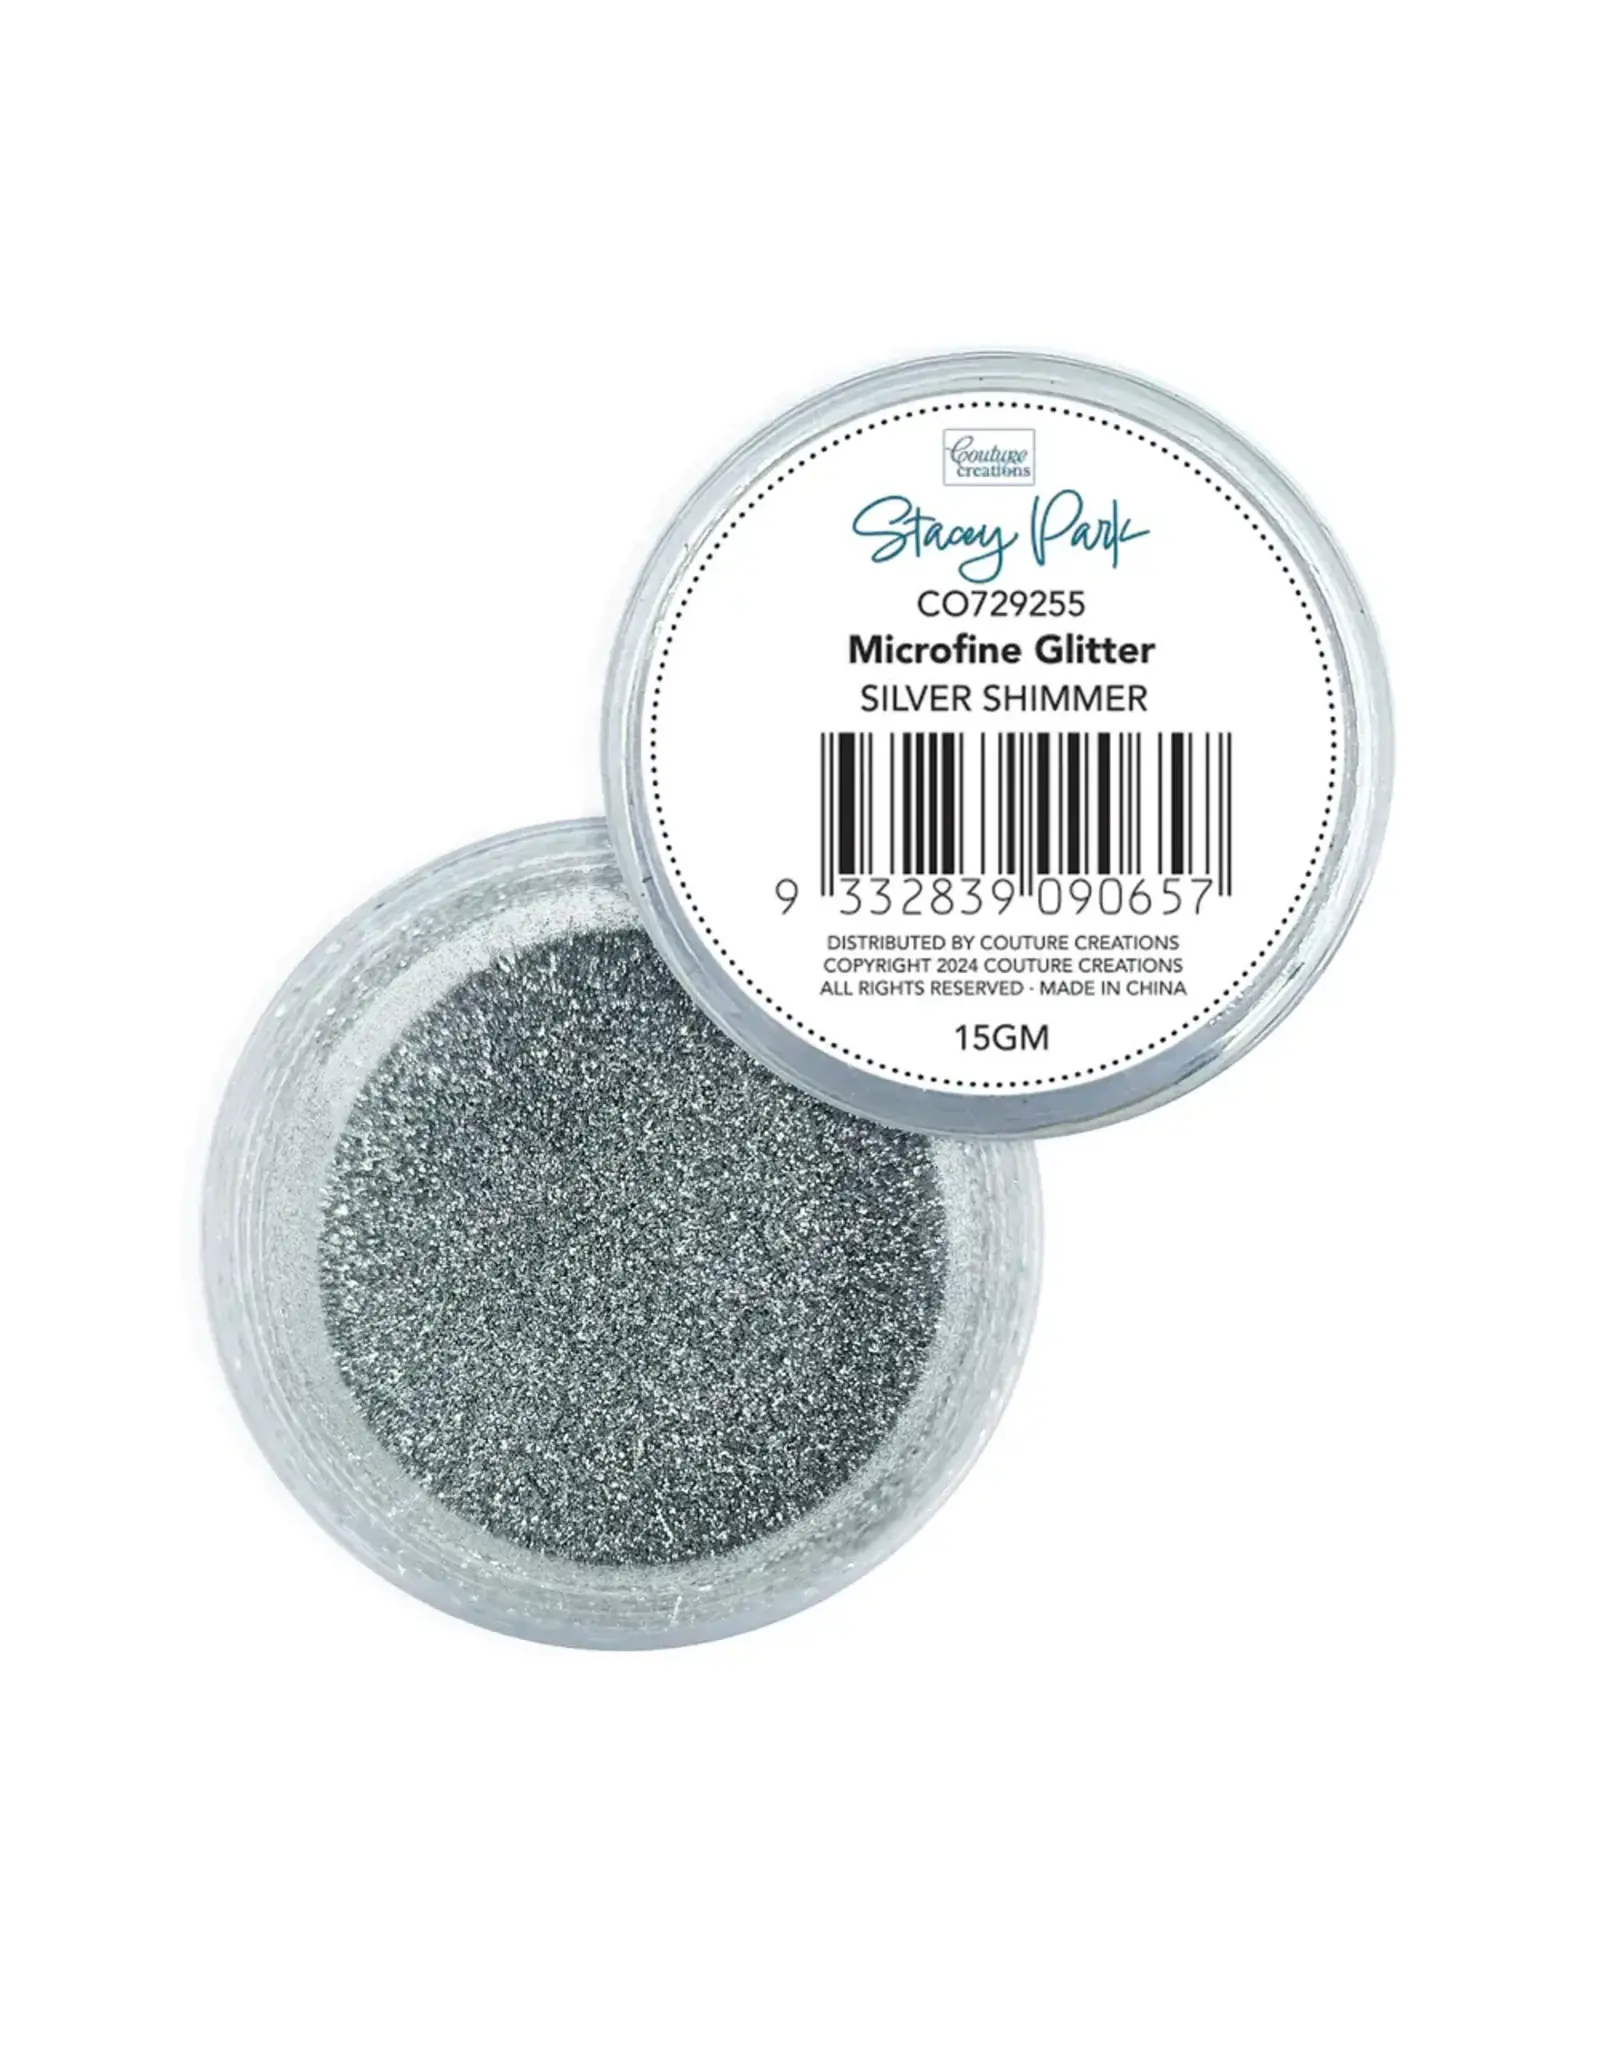 COUTURE CREATIONS COUTURE CREATIONS STACEY PARK SILVER SHIMMER MICROFINE GLITTER